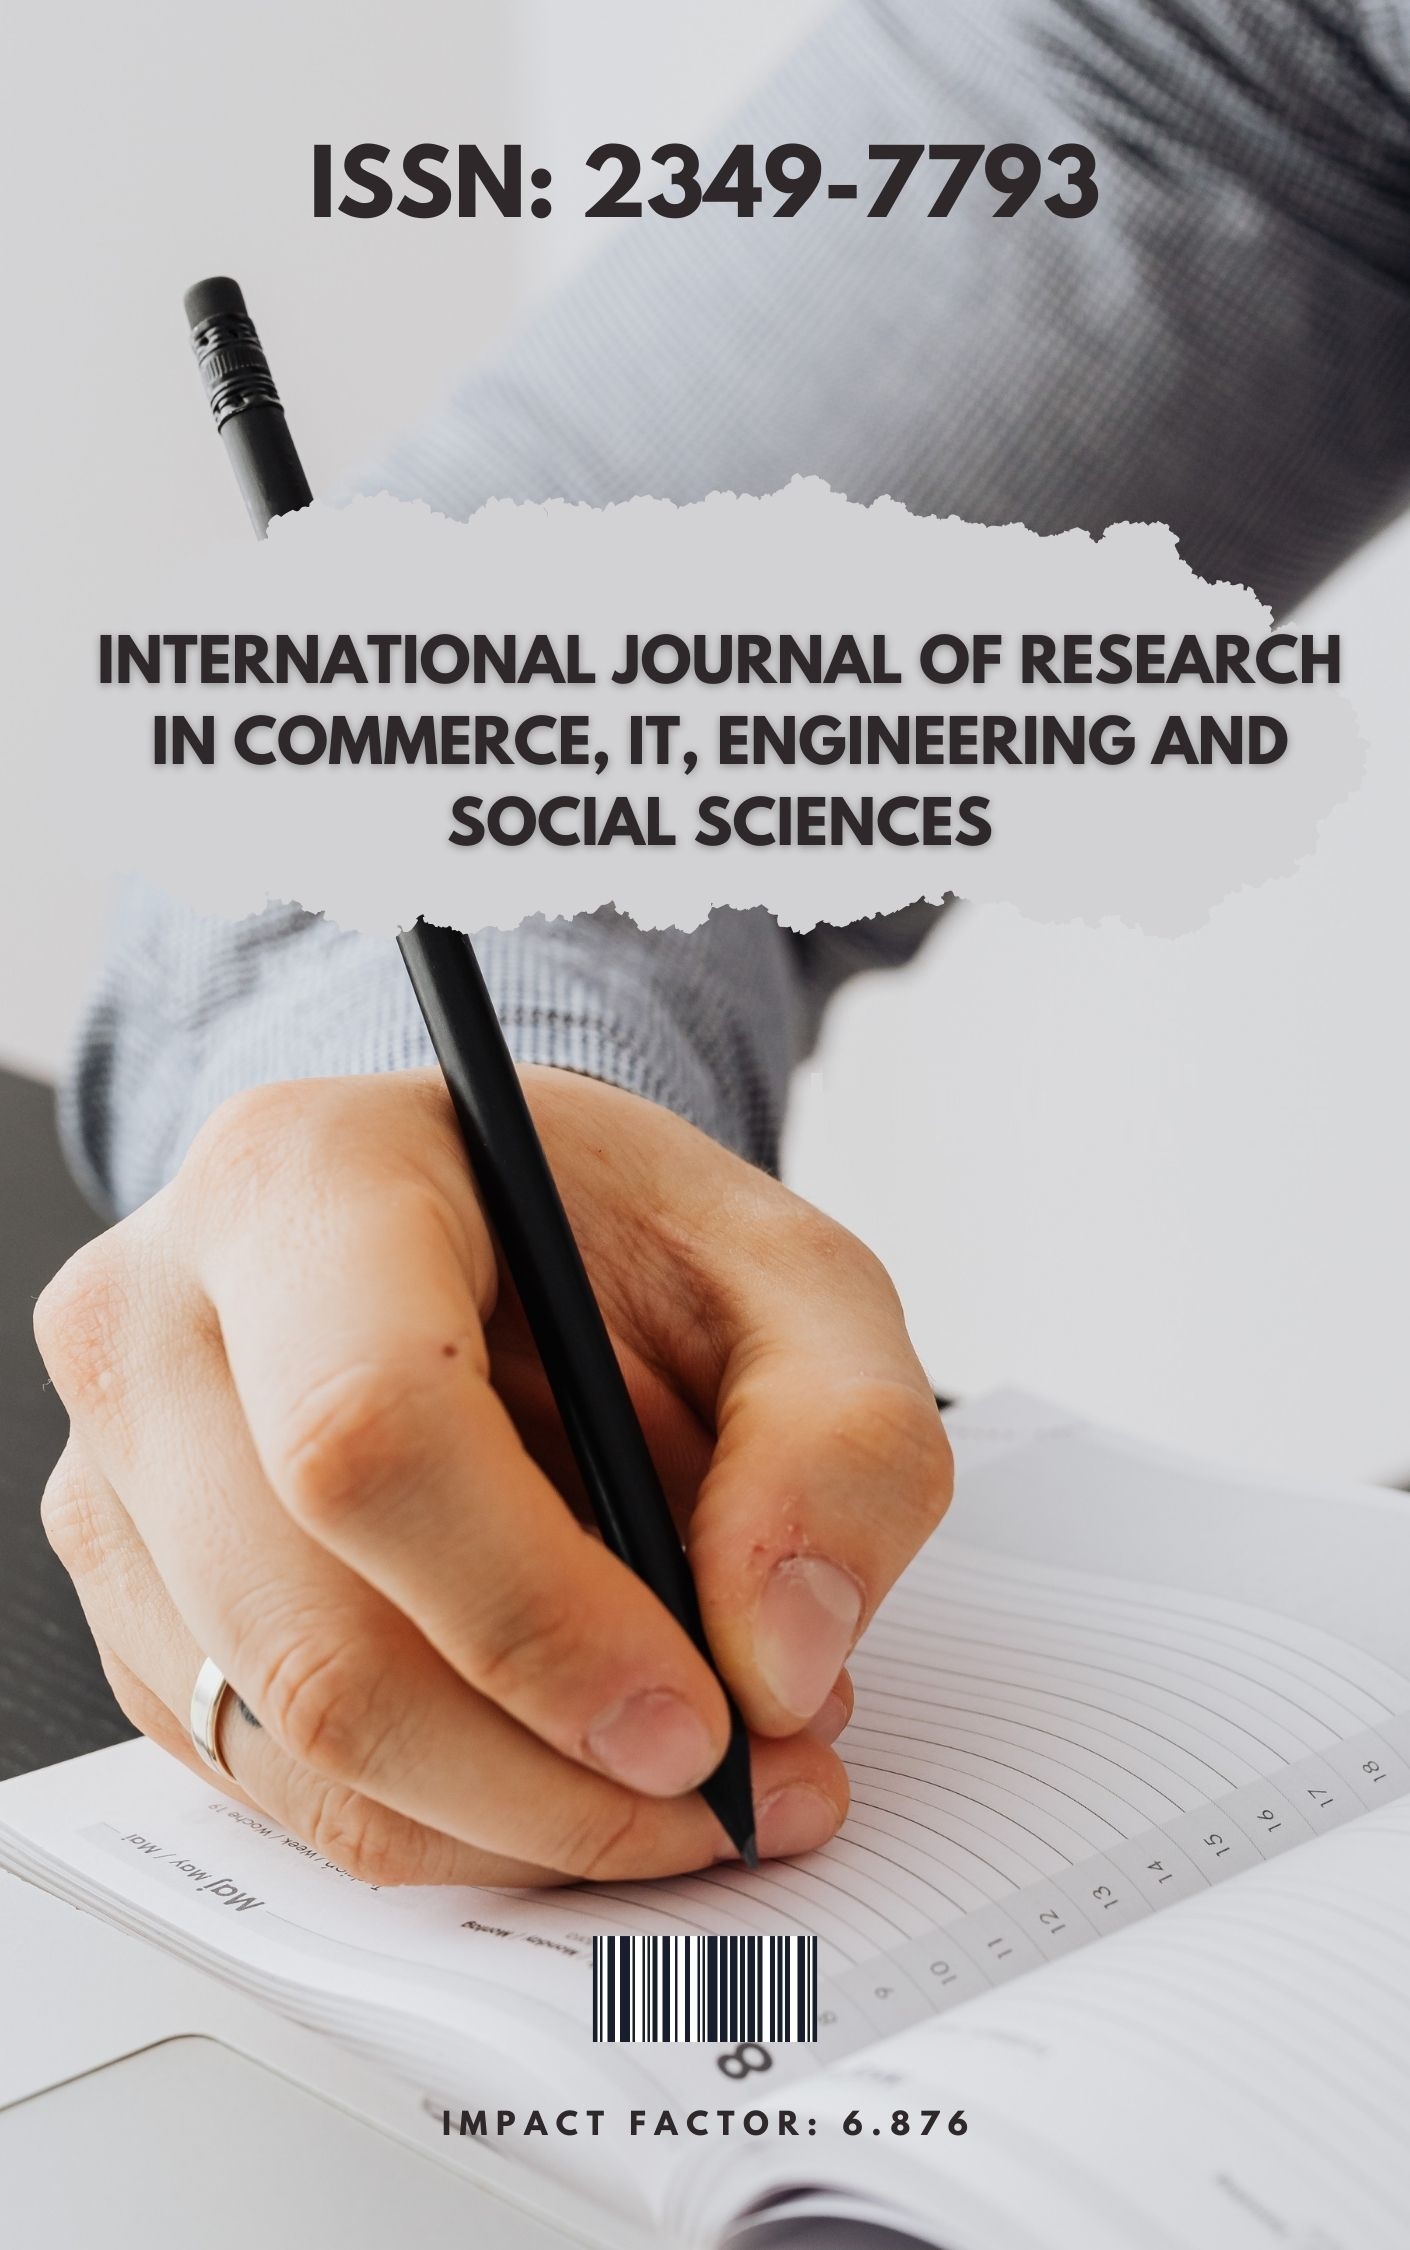 					View Vol. 15 No. 7 (2021): International Journal of Research in Commerce, IT, Engineering, and Social Sciences
				